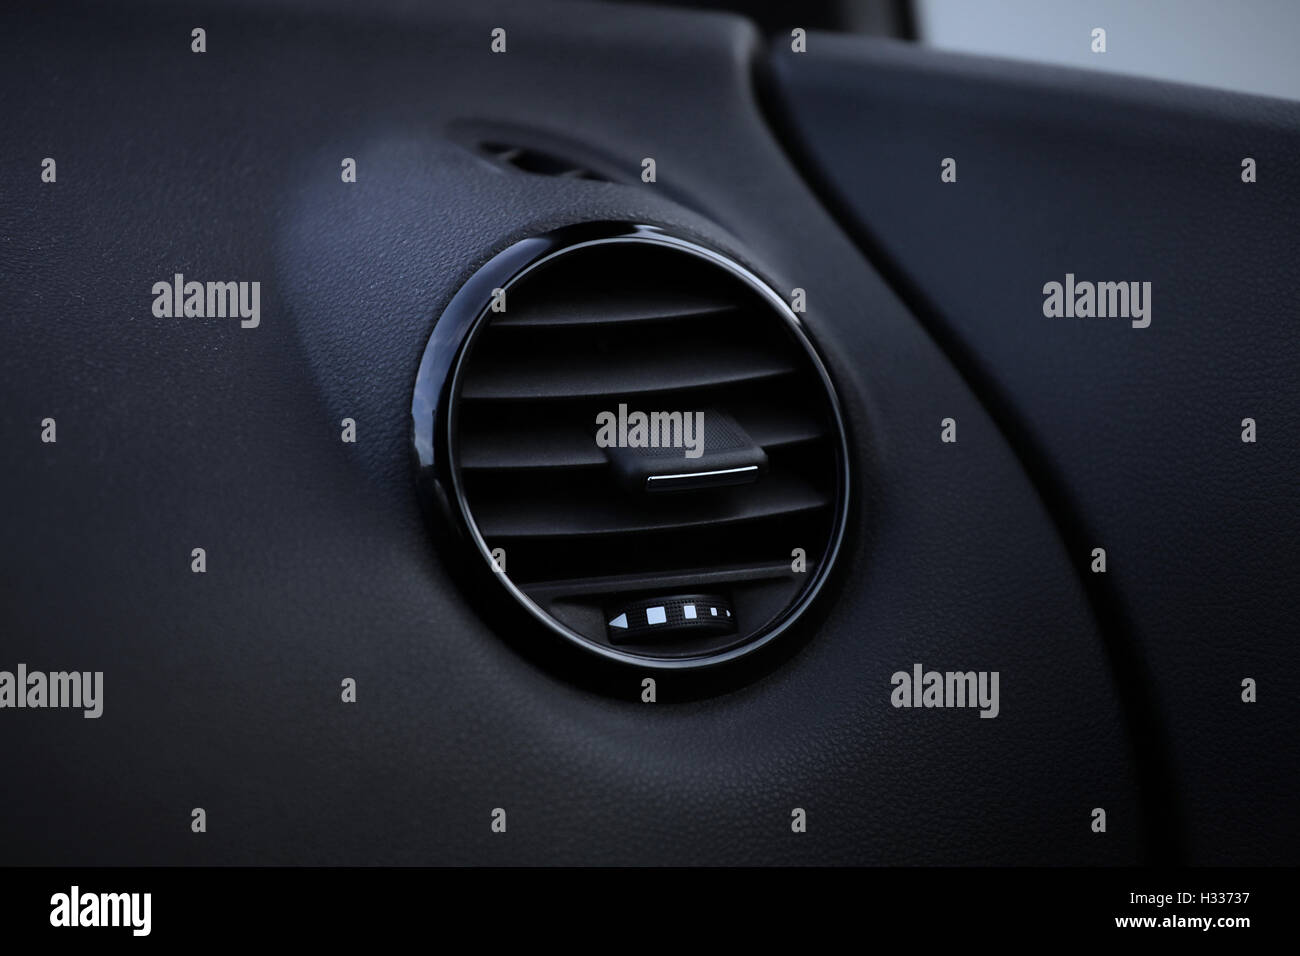 Details of air conditioning in modern car Stock Photo